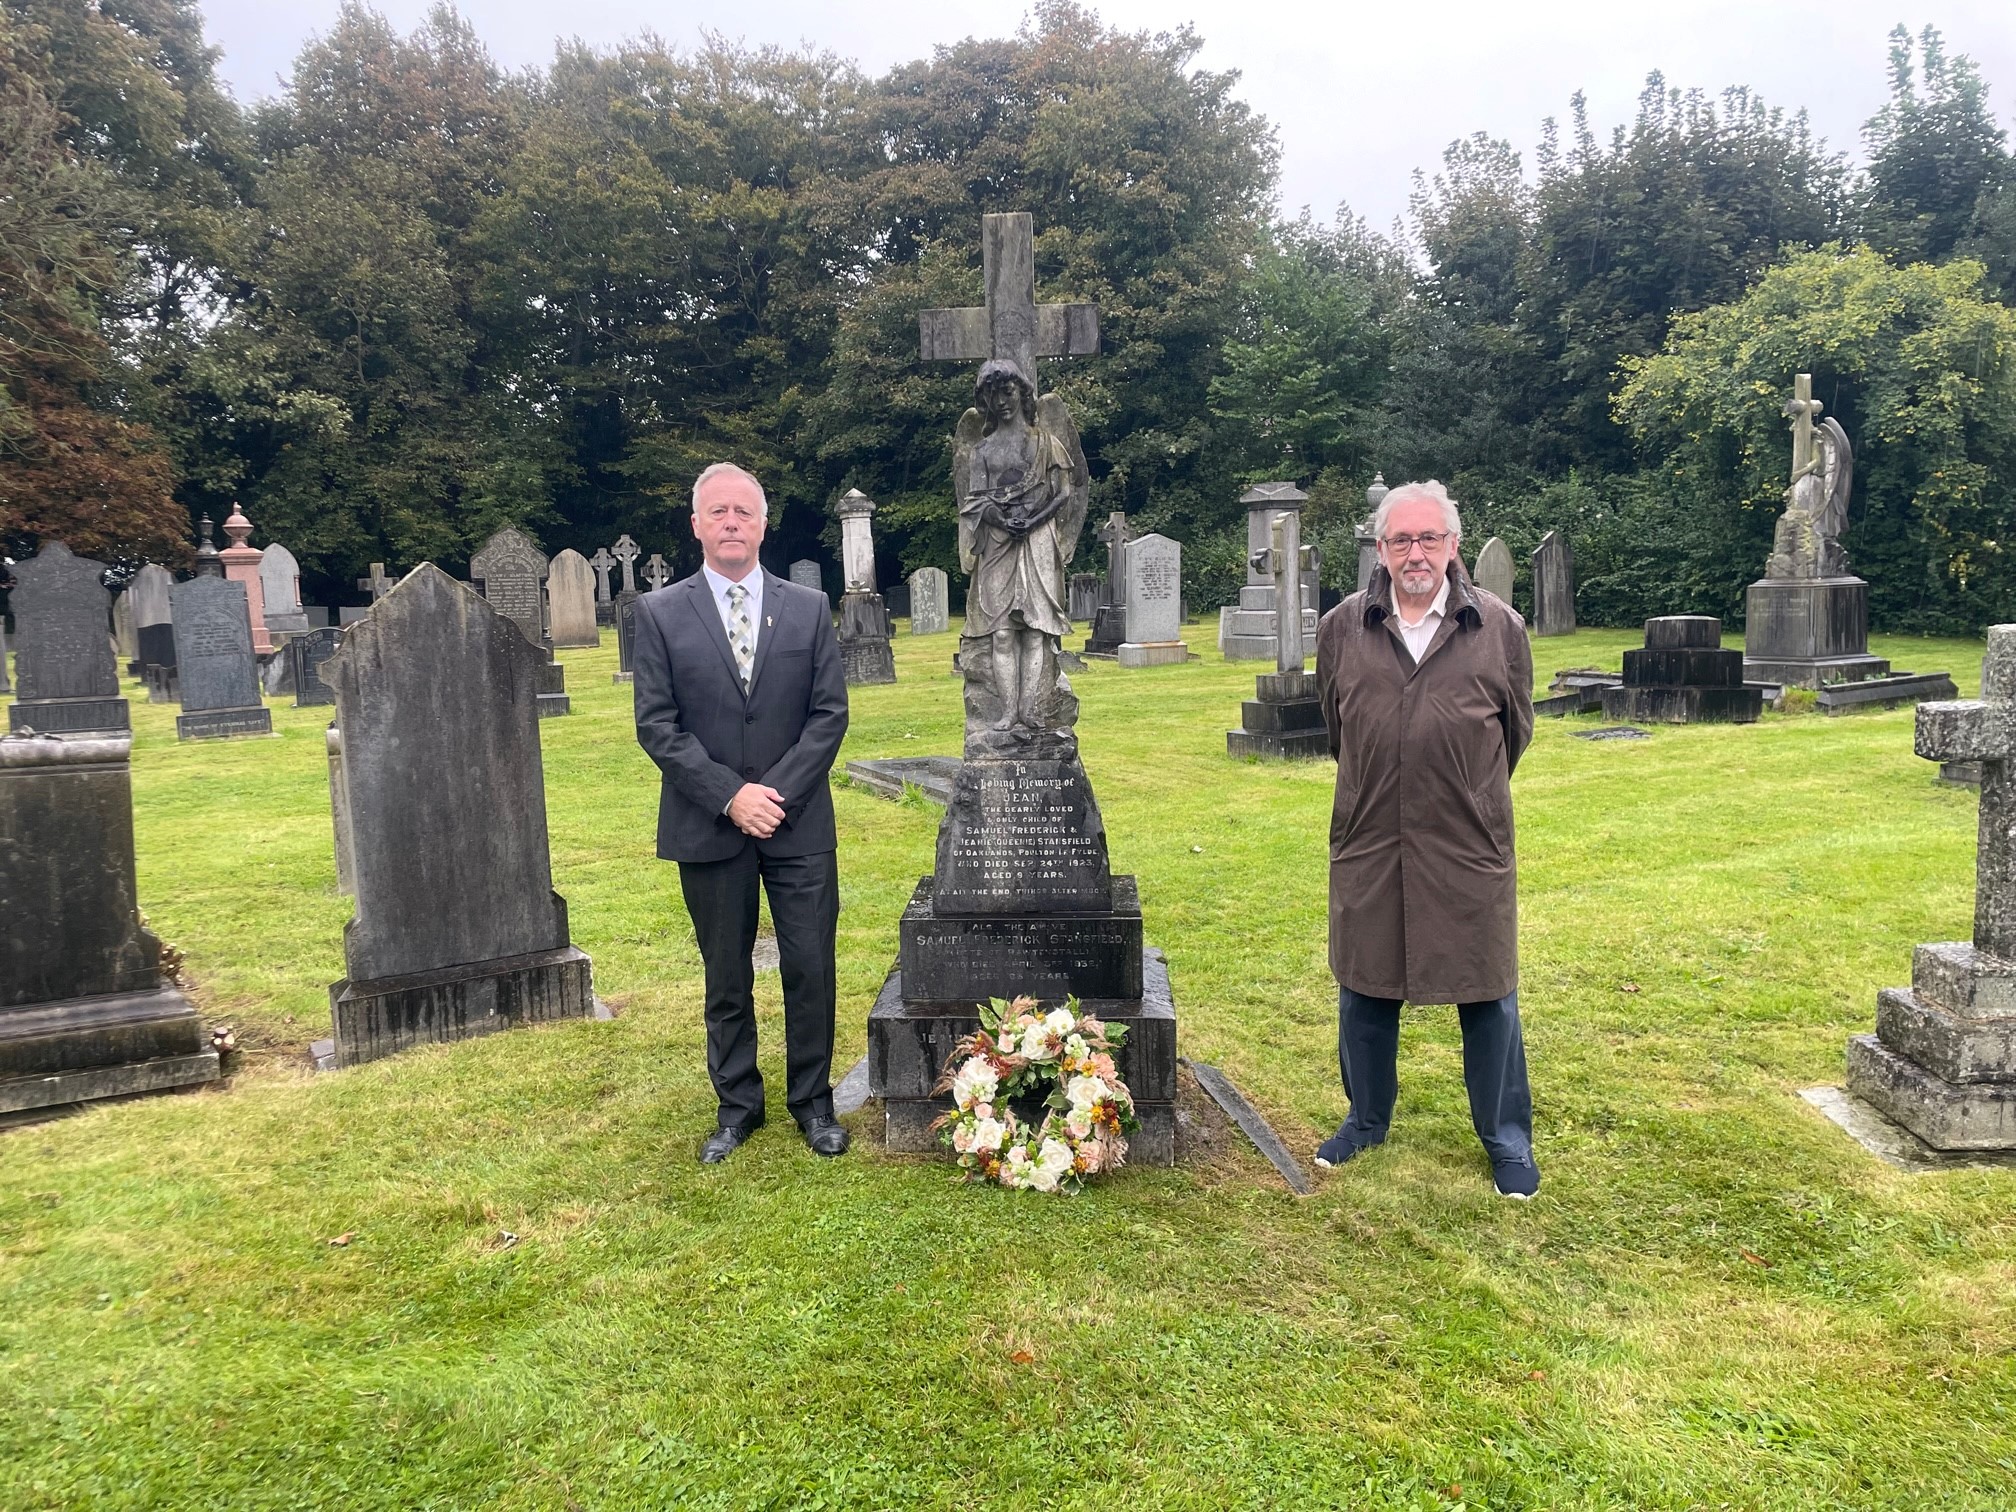 Cllr le marinel and cllr nicholls at the final resting place of jean stansfield